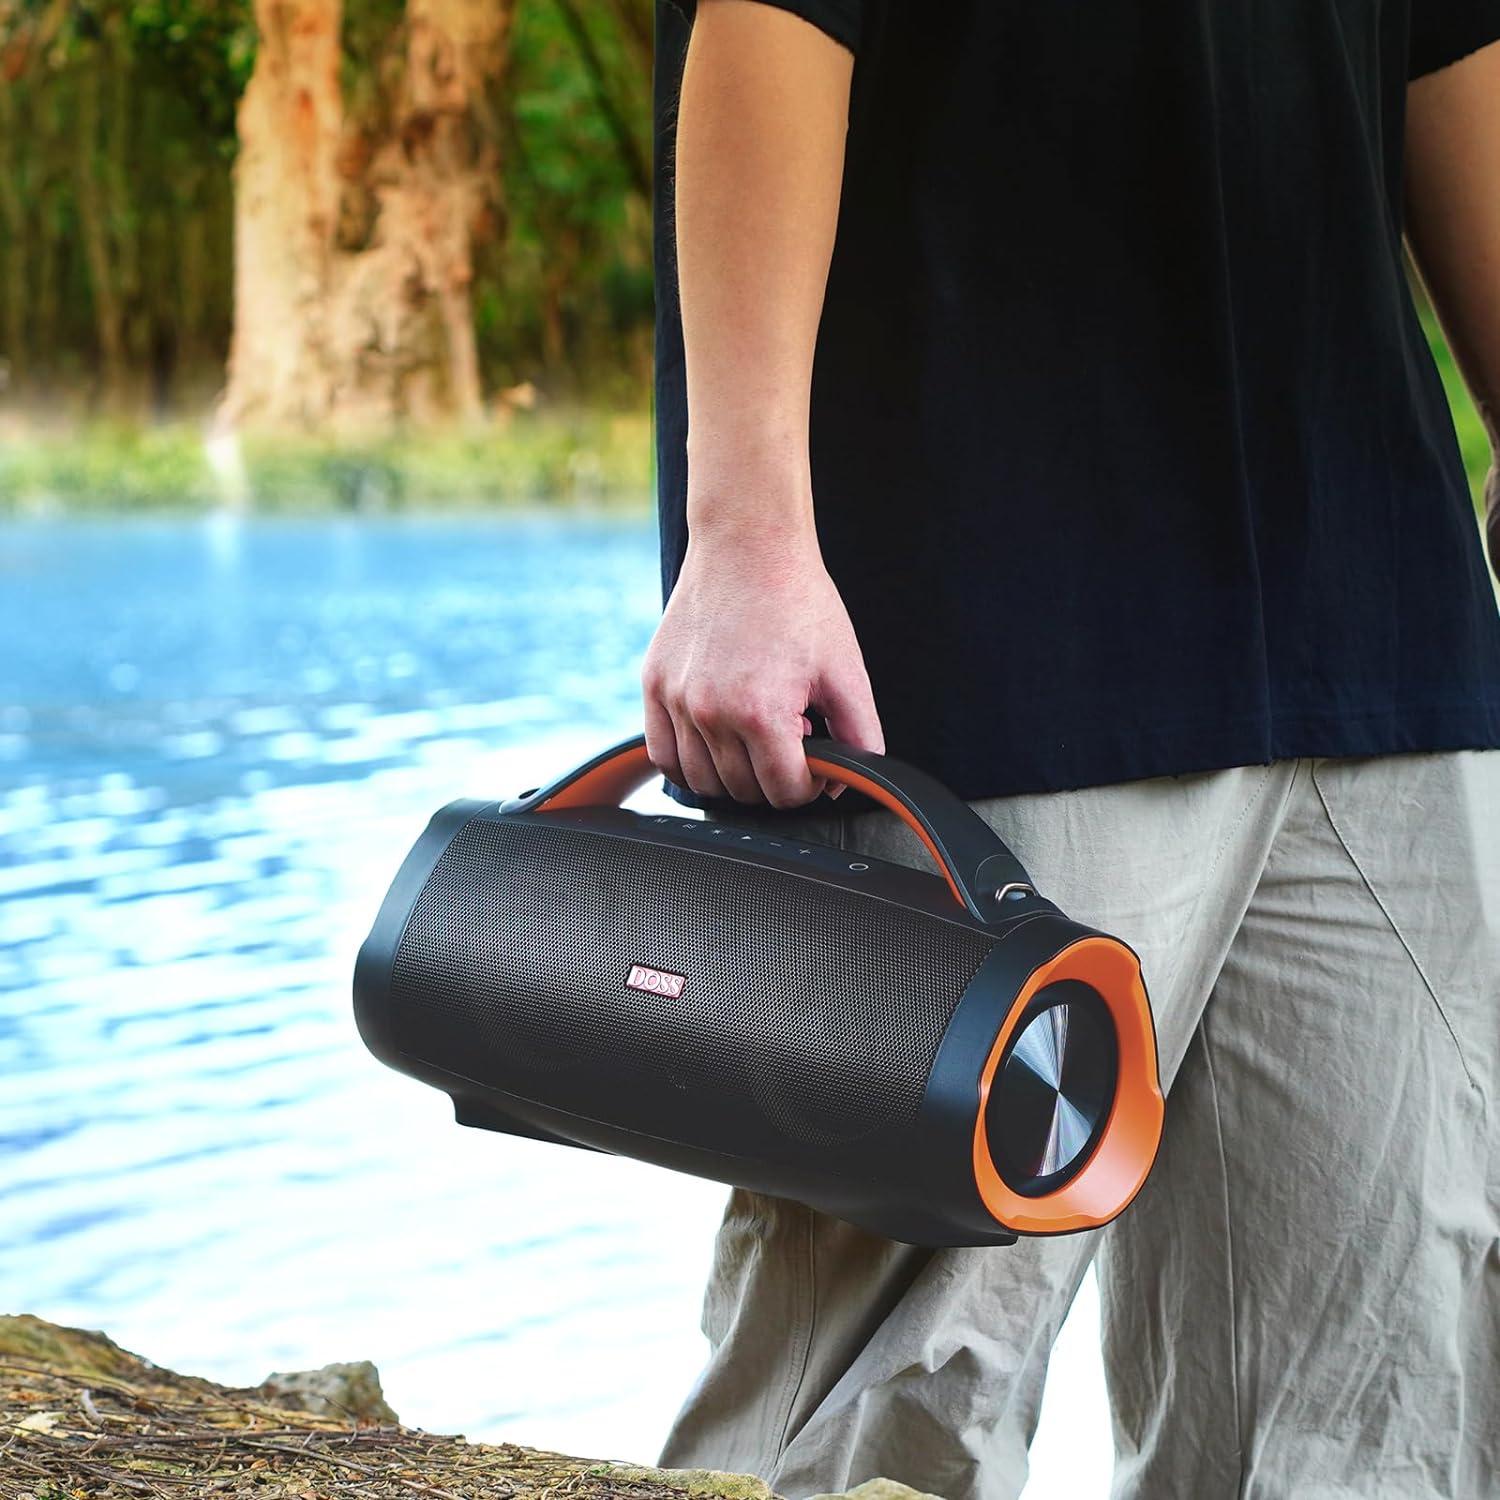 DOSS Extreme Boom+ IPX6 Waterproof Outdoor Speaker with 100W